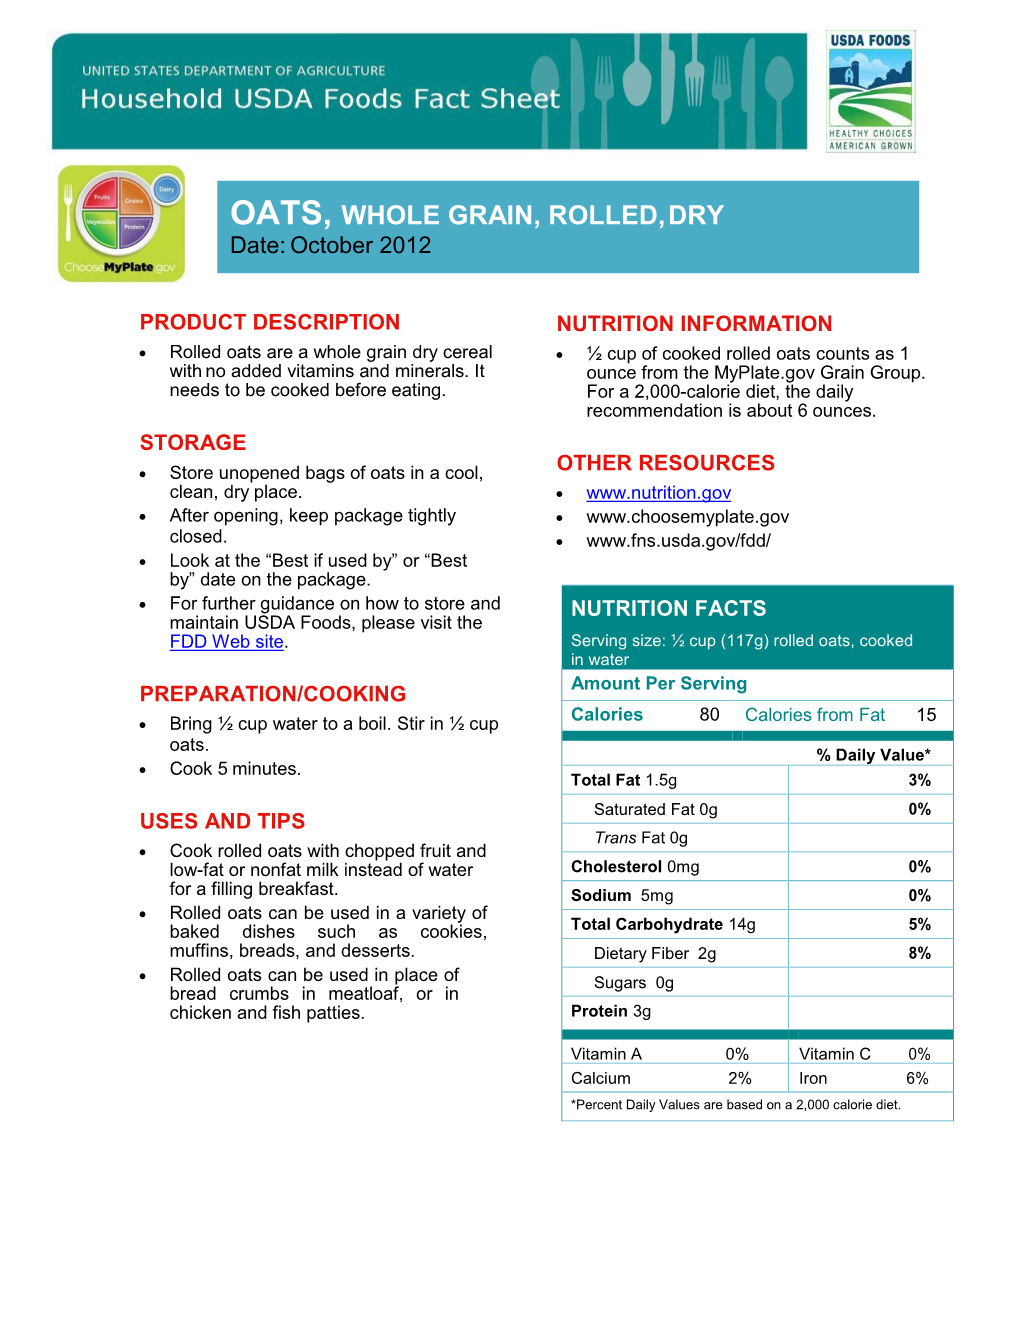 NUTRITION FACTS Maintain USDA Foods, Please Visit the FDD Web Site